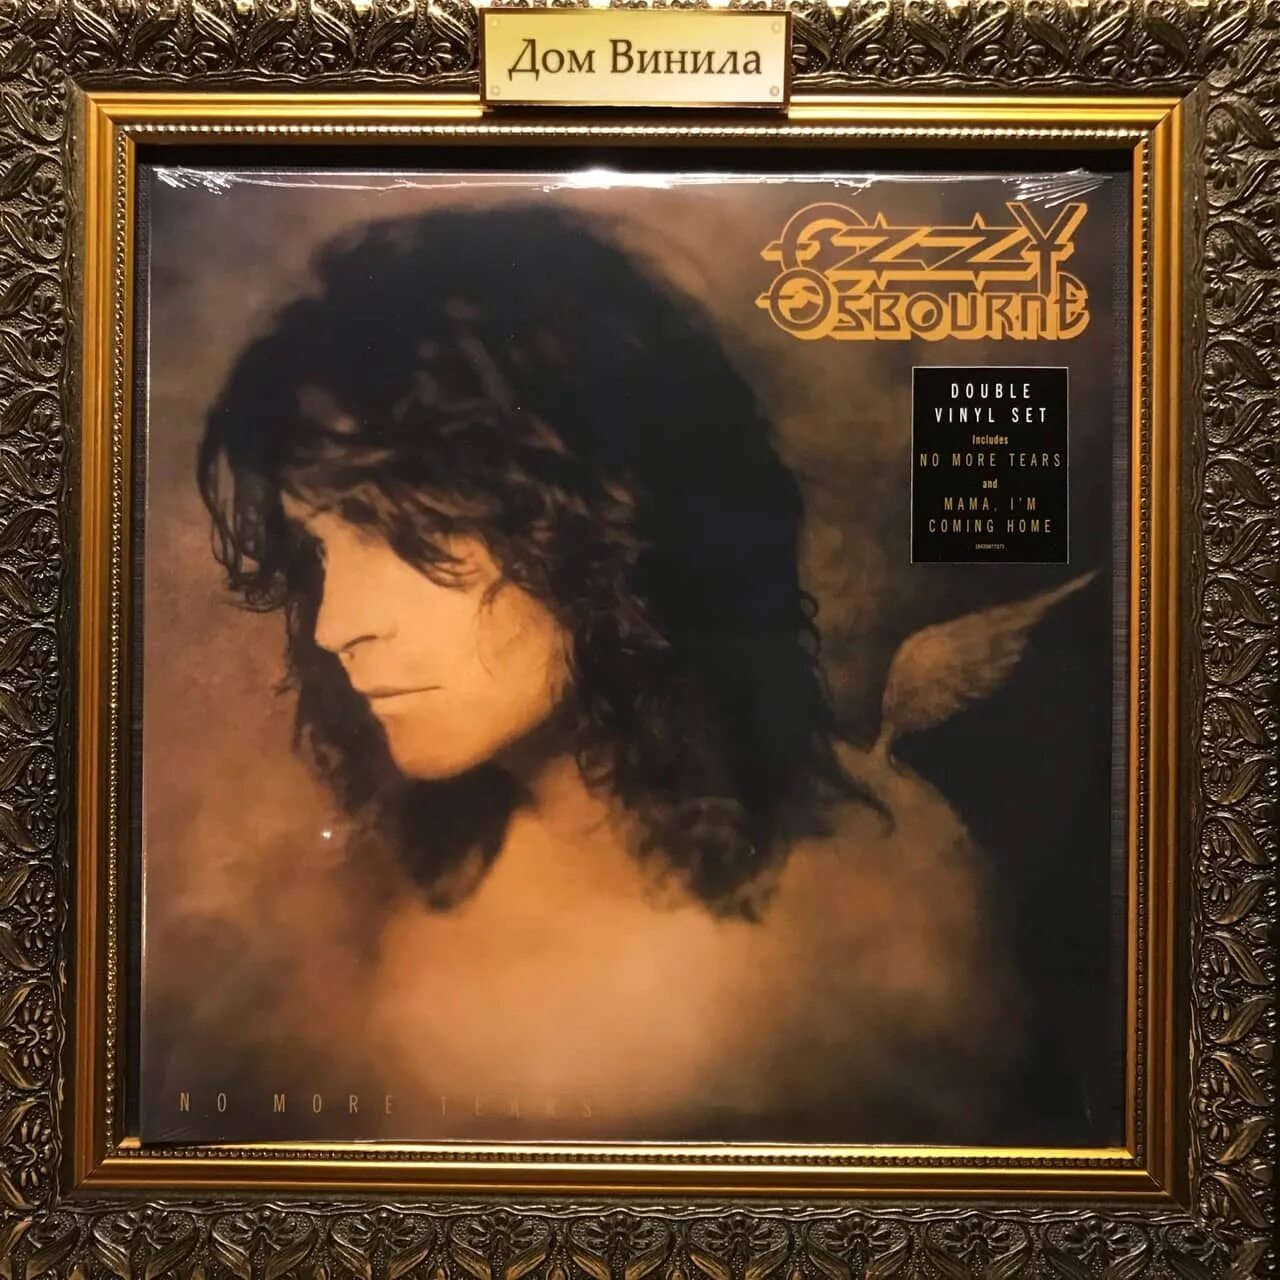 No more tears текст. Ozzy Osbourne no more tears обложка. Ozzy Osbourne 1991. Ozzy Osbourne no more tears 1991. Ozzy Osbourne - 1991 - no more tears (30th Anniversary expanded Edition).